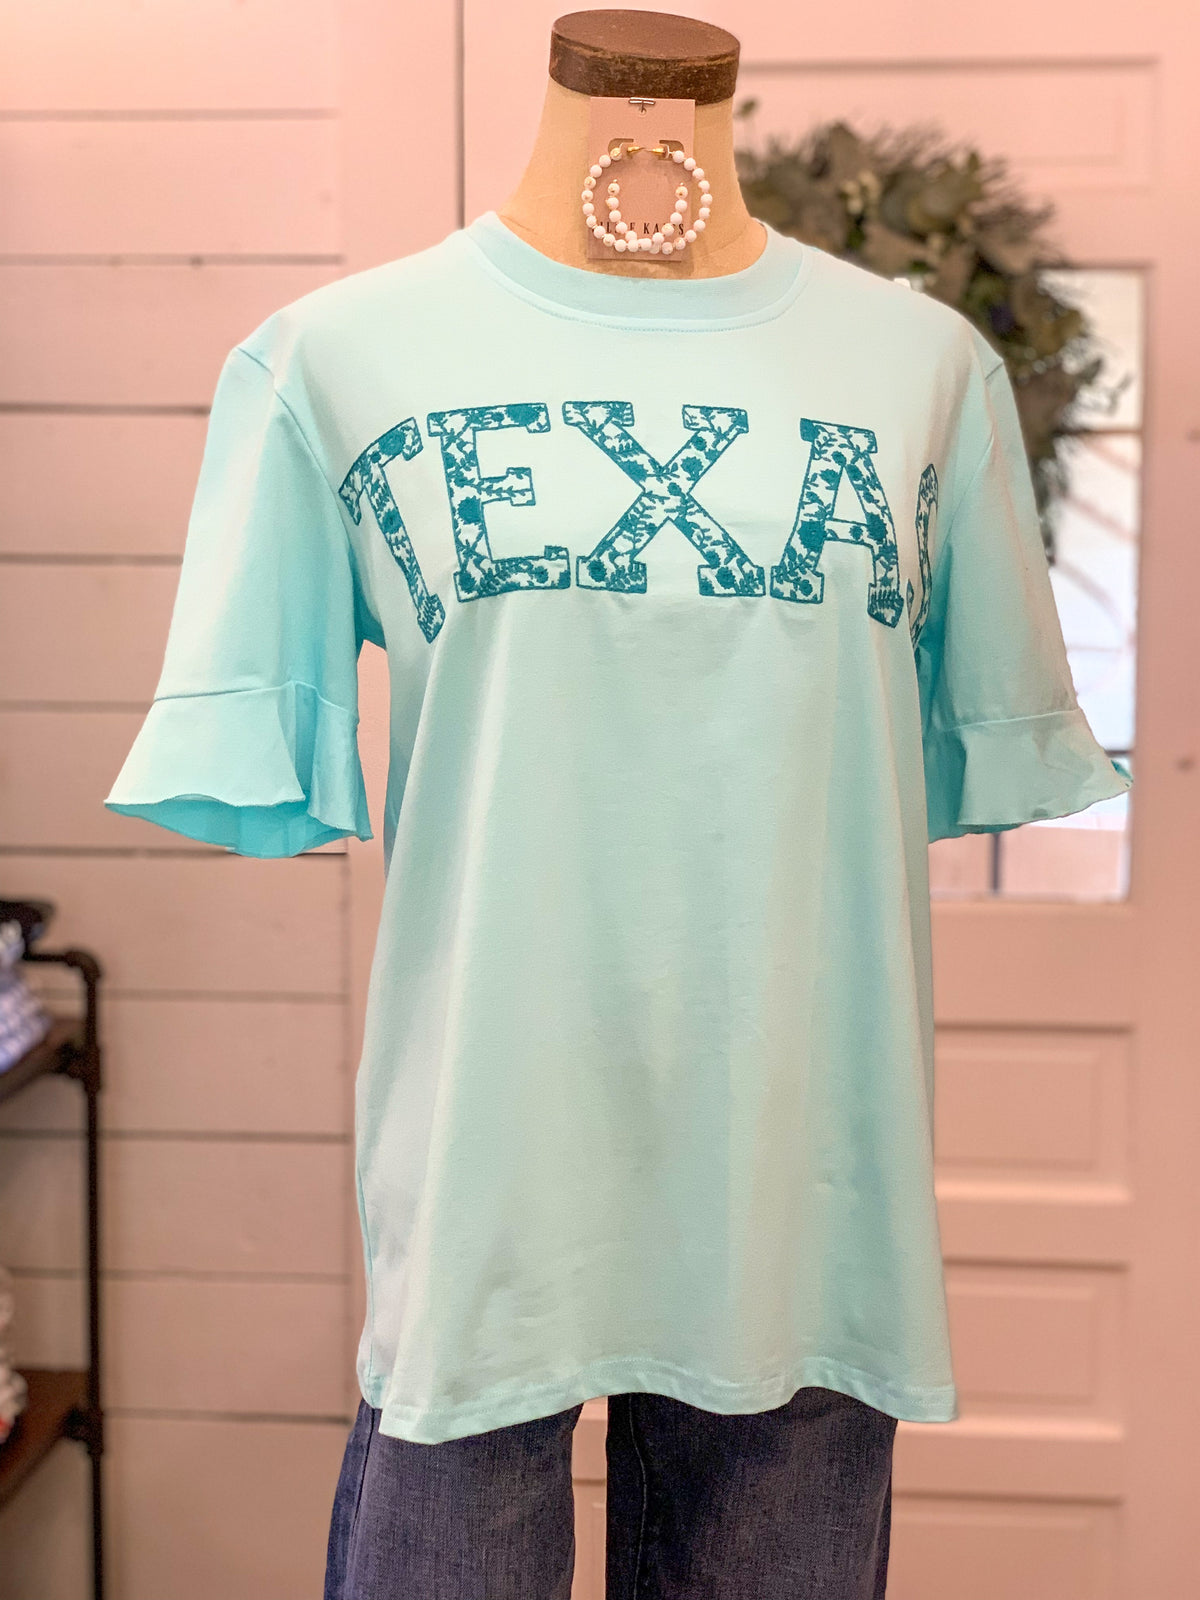 blue ruffle sleeve top that has texas emrbroidered 